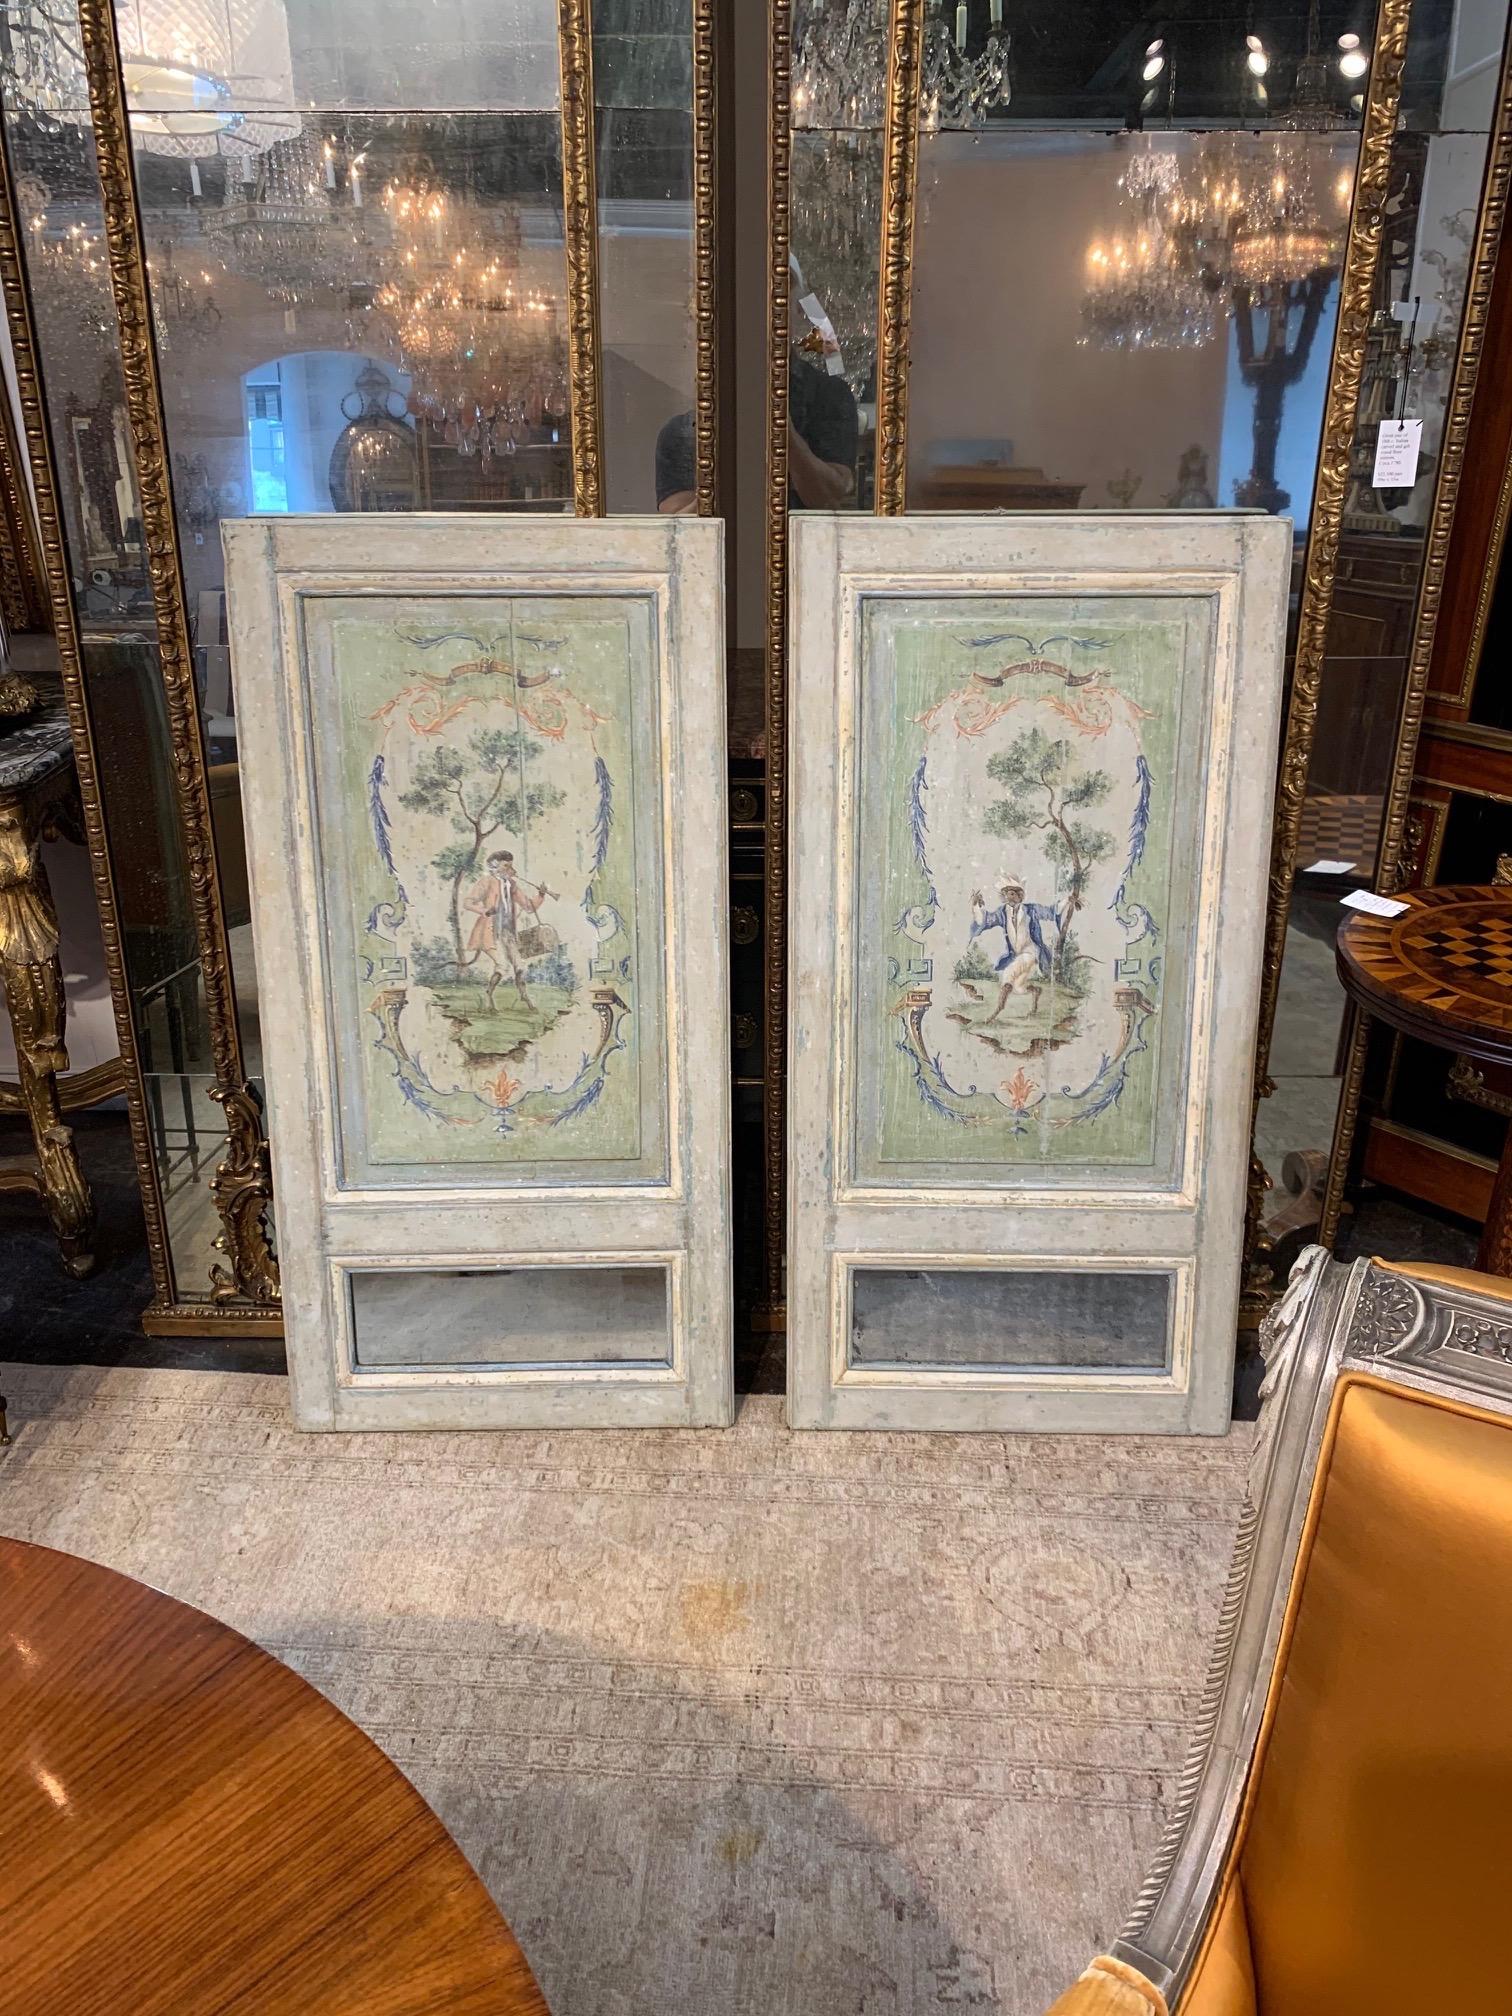 Beautiful pair of French 18th century Trumeau panels painted with monkeys. These have a lovely patina and small mirrors at the bottom. So interesting! A nice decorative accessory!